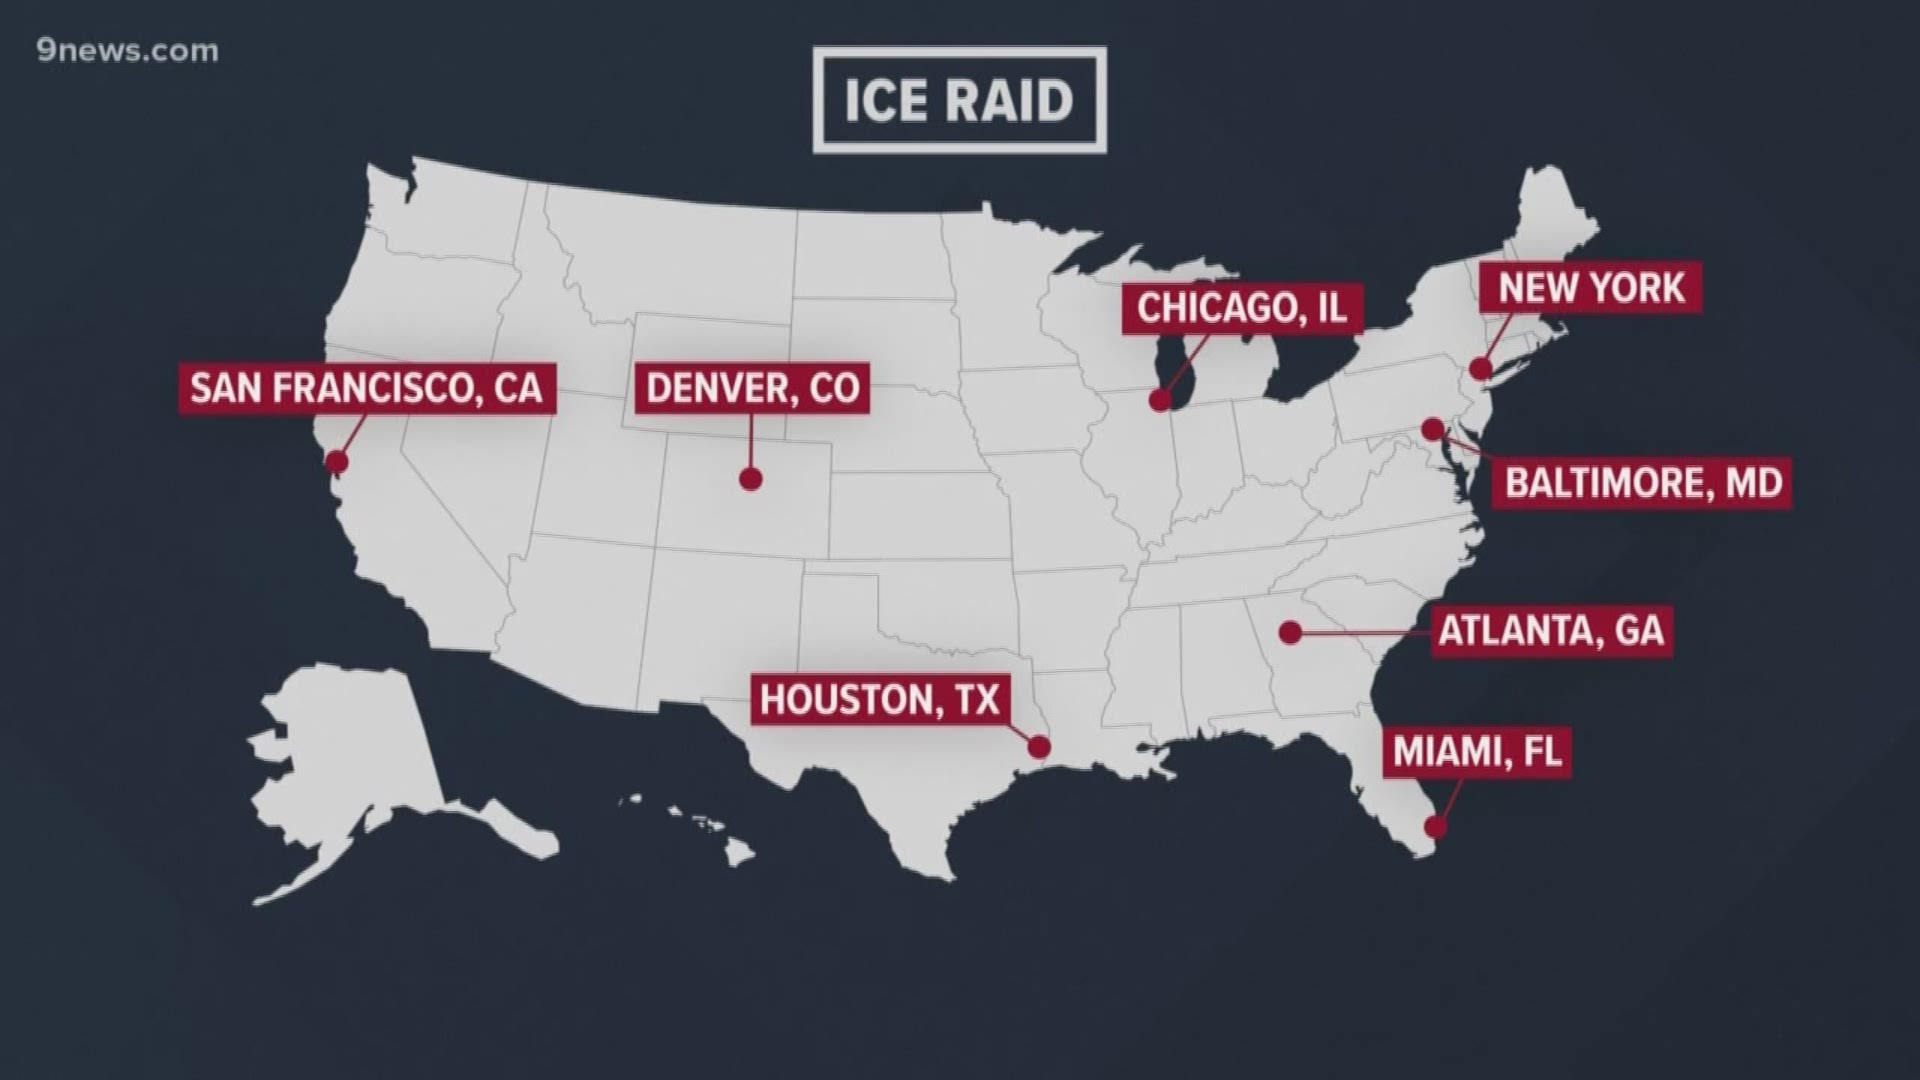 The raids were postponed 3 weeks ago but are now set to take place in the cities revealed under the previous plan.